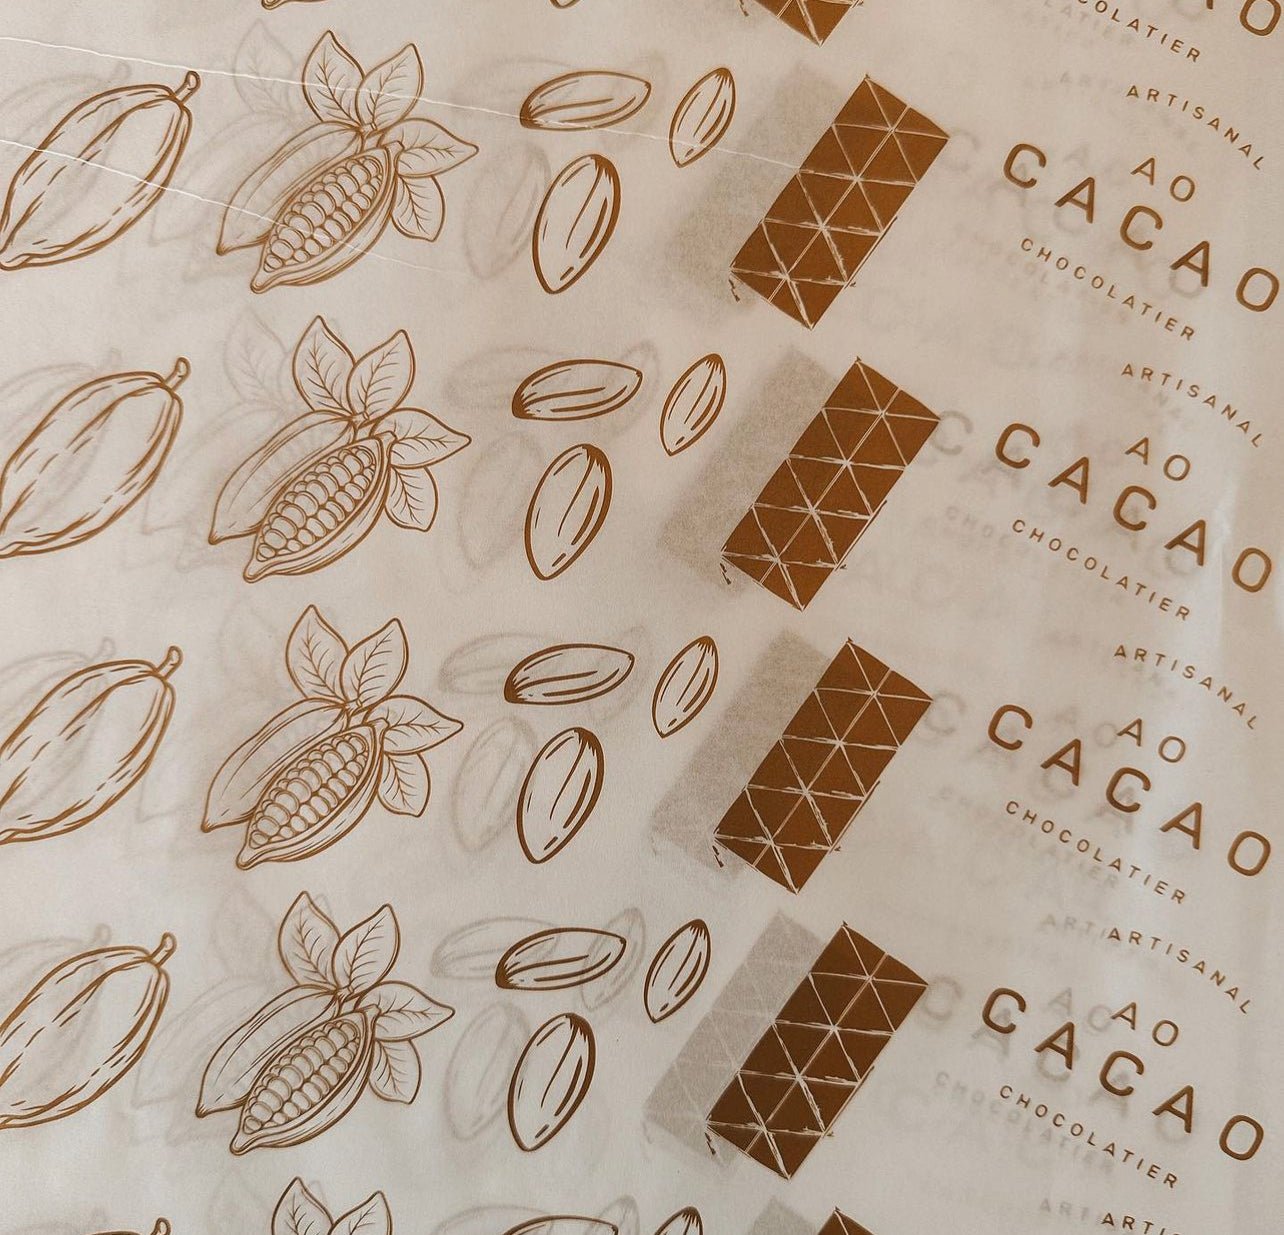 Ao Cacao - The Maple Walnut 45% (White) - The Flower Crate